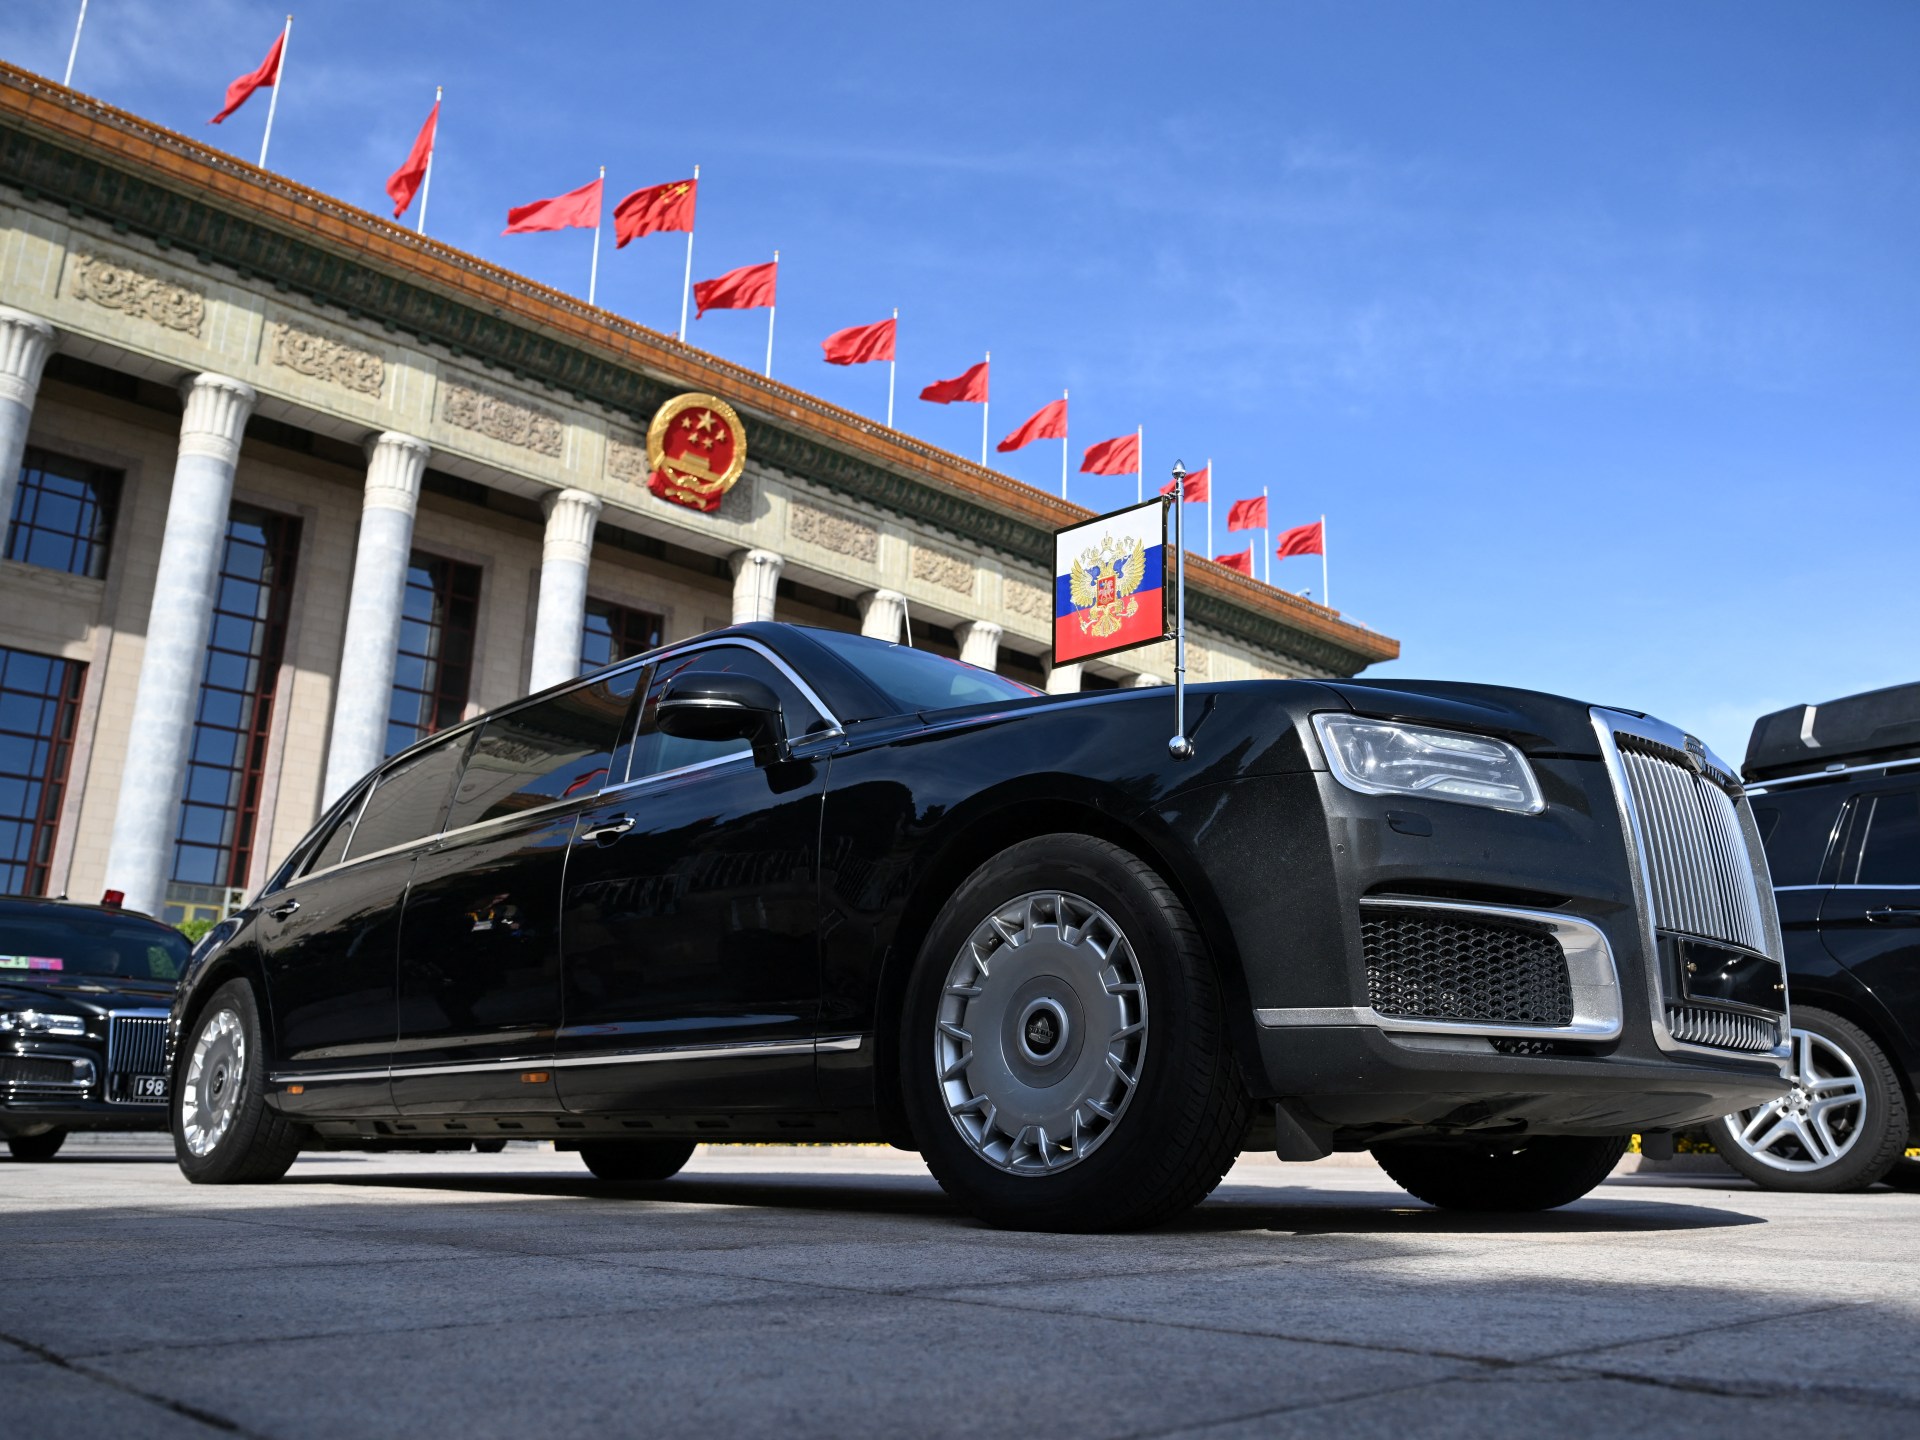 Kim Jong Un takes ride in luxury Russian limo given to him by Putin